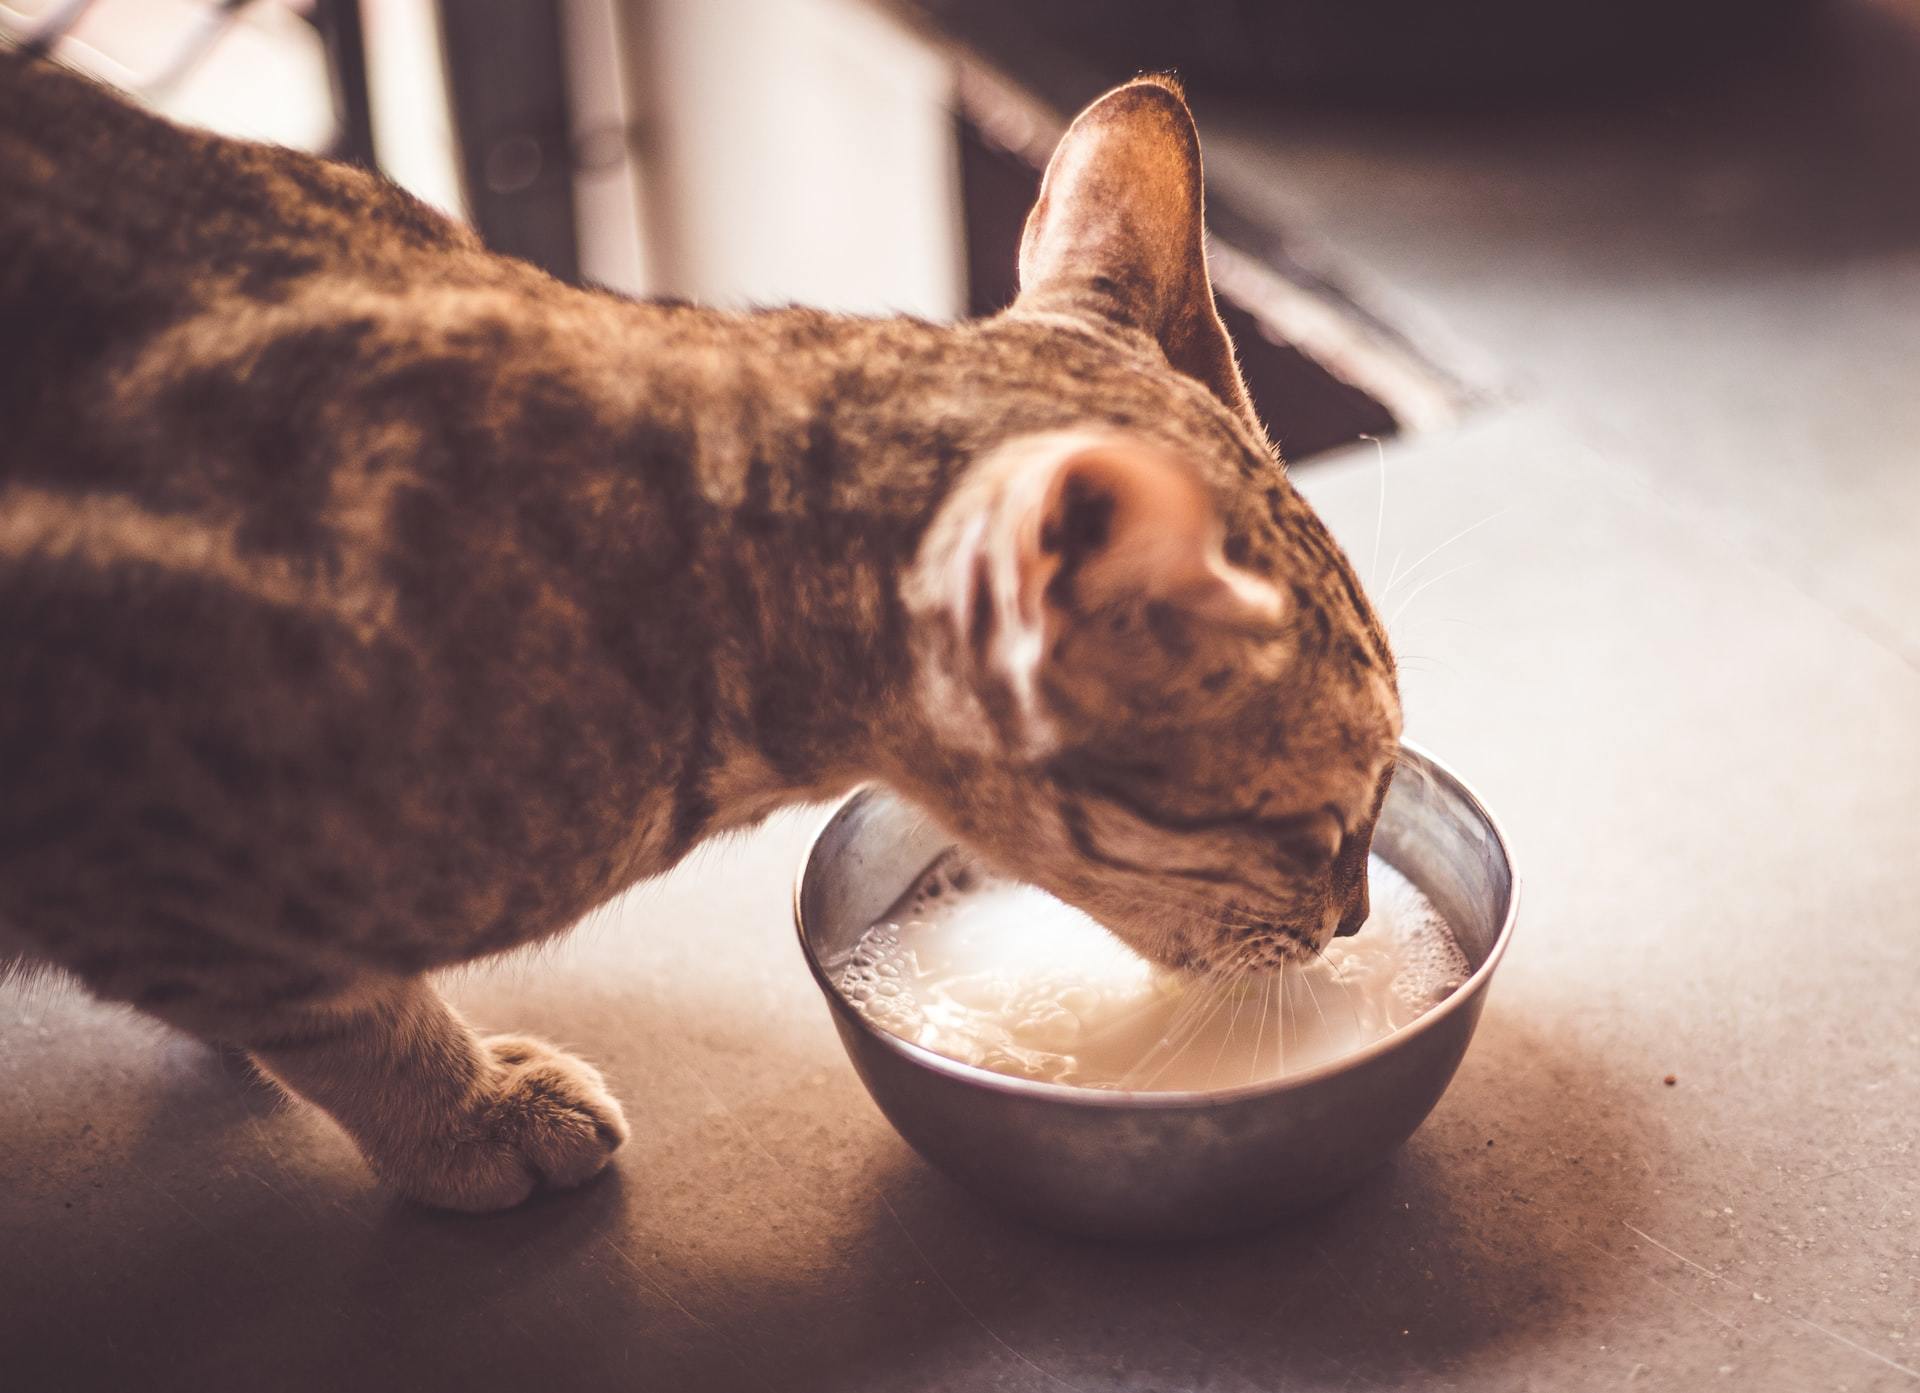 can cats drink milk